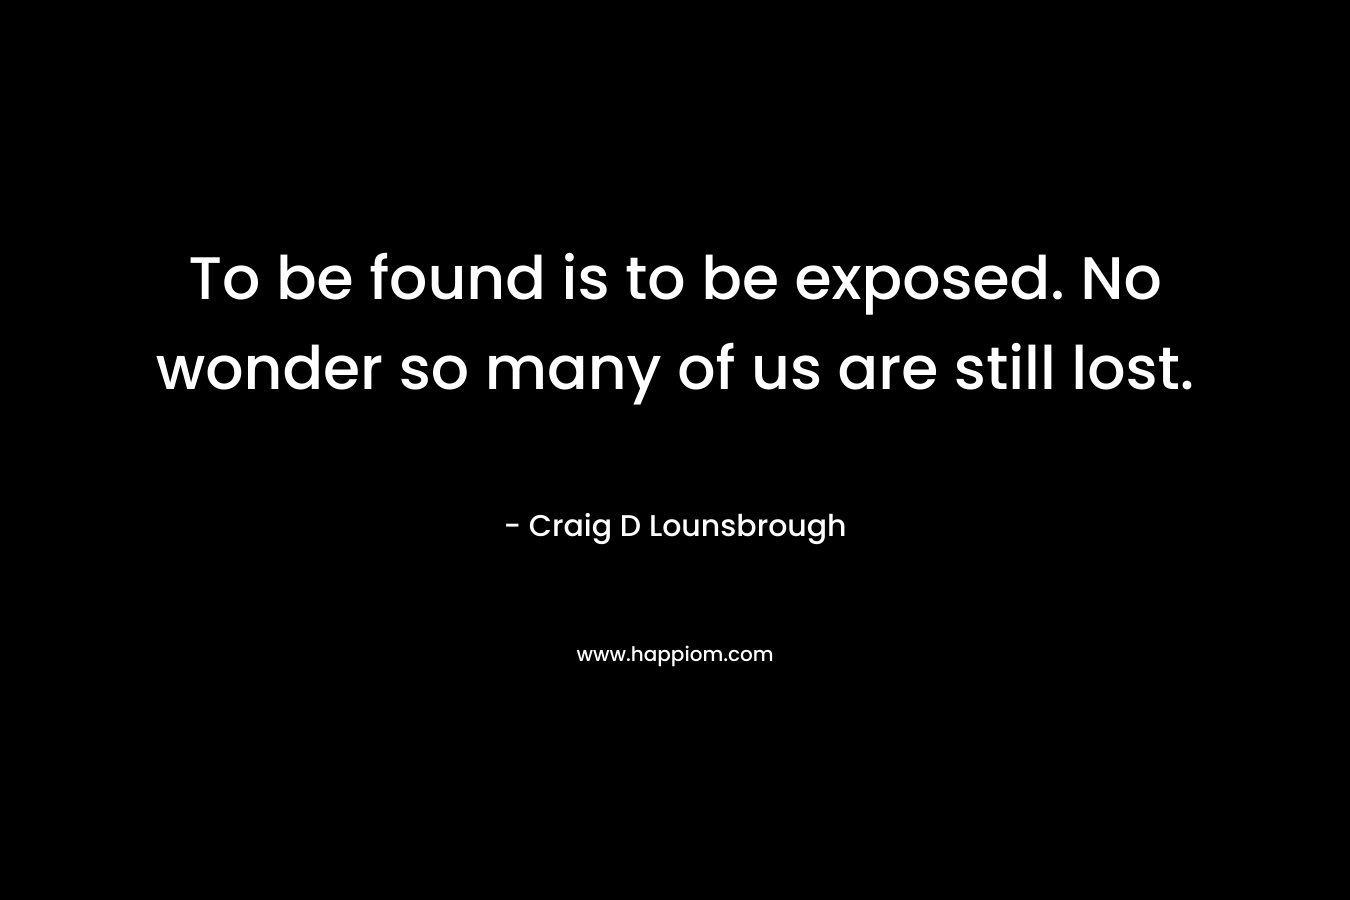 To be found is to be exposed. No wonder so many of us are still lost. – Craig D Lounsbrough